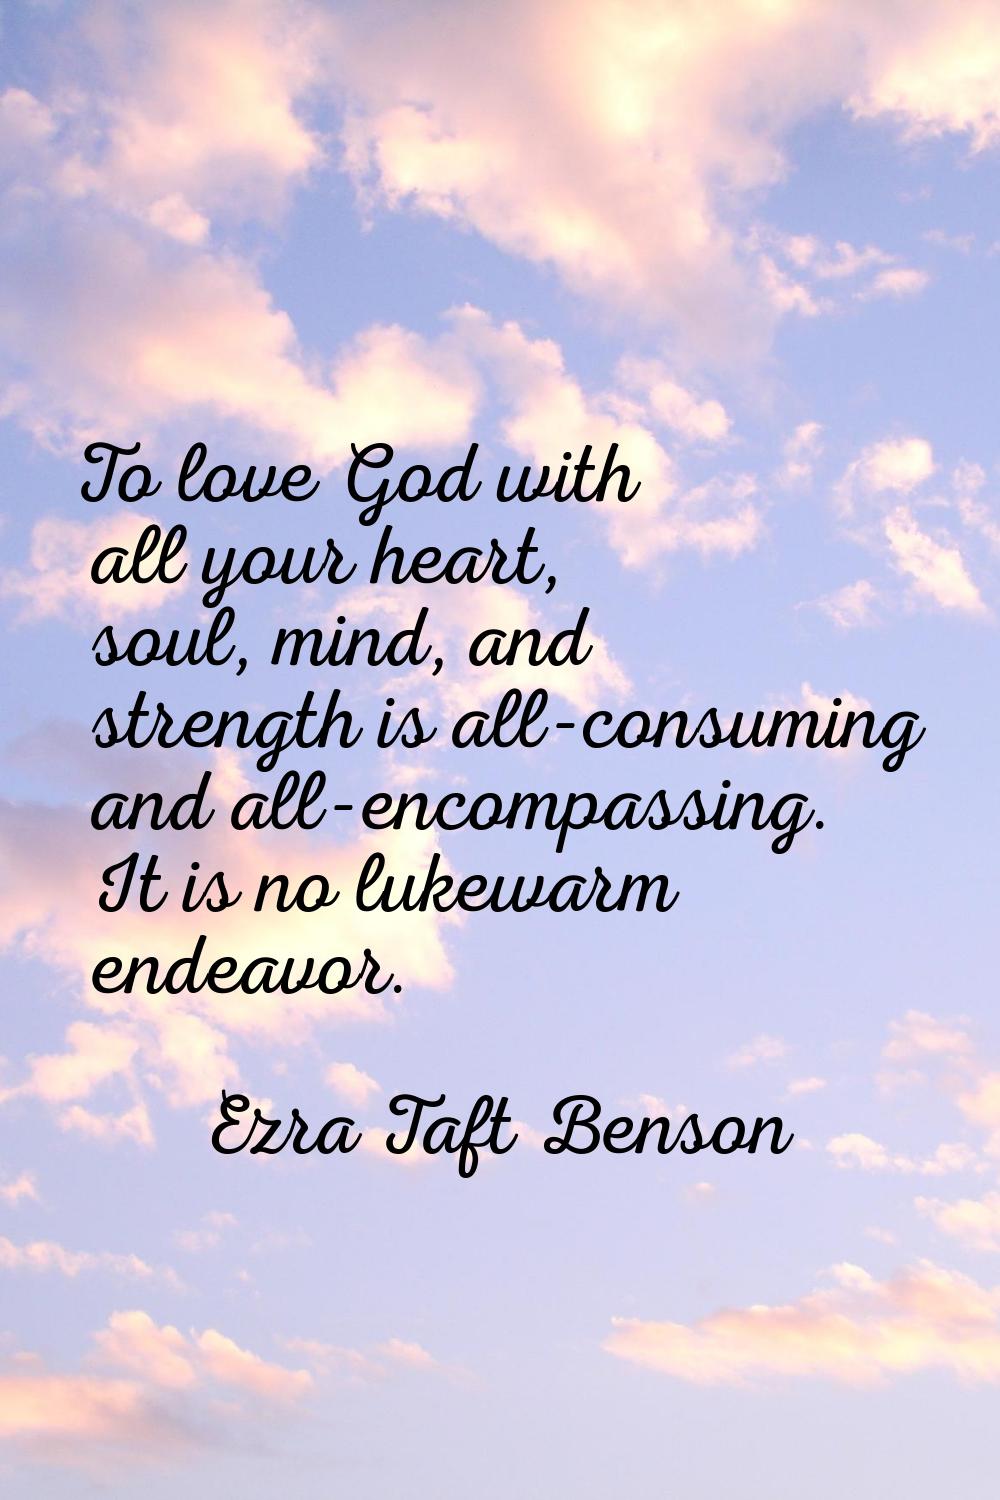 To love God with all your heart, soul, mind, and strength is all-consuming and all-encompassing. It